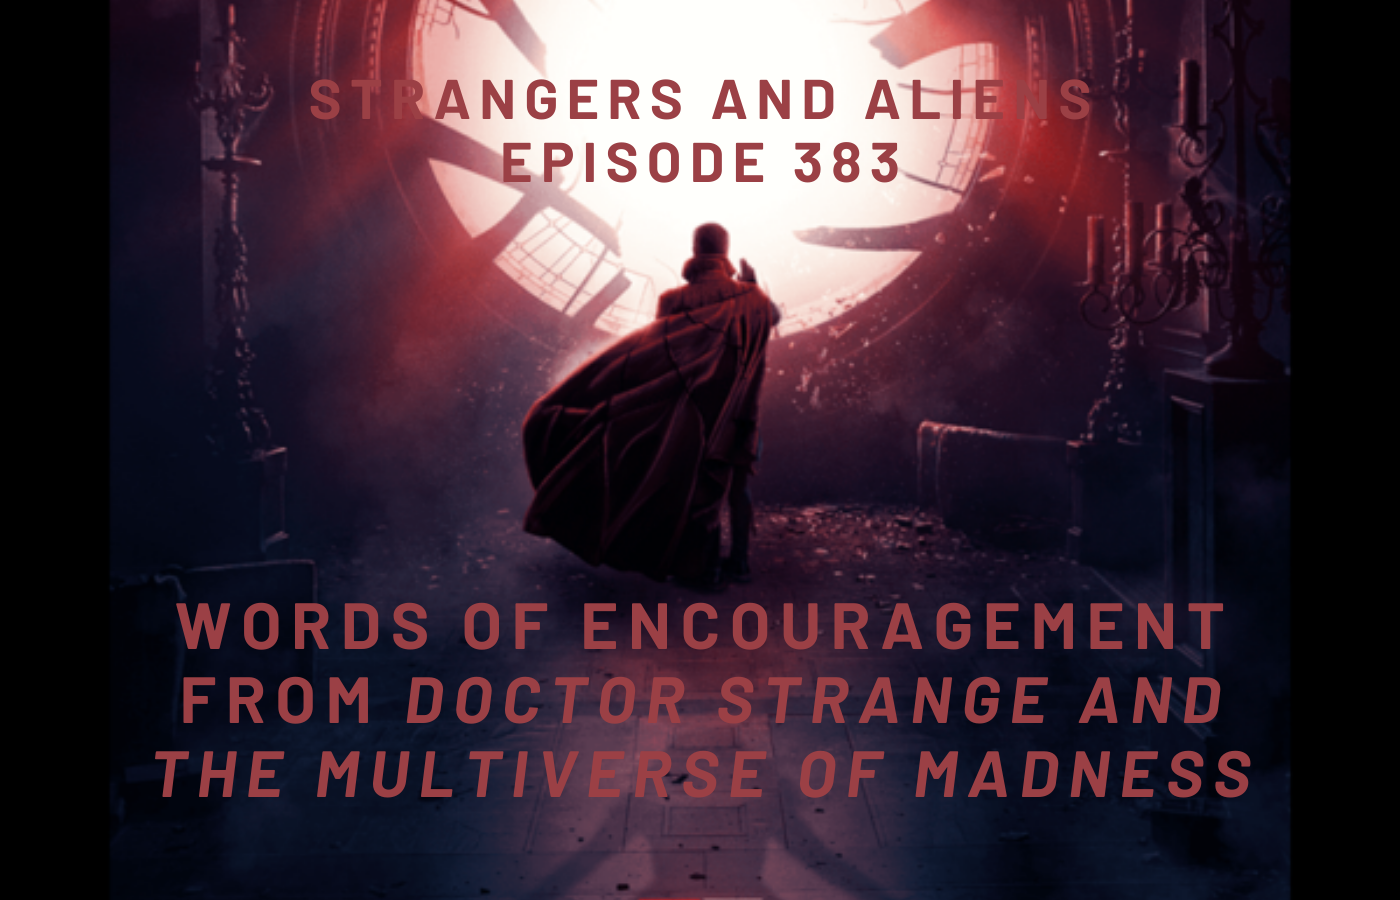 Words of Encouragement from DOCTOR STRANGE AND THE MULTIVERSE OF MADNESS – SA383